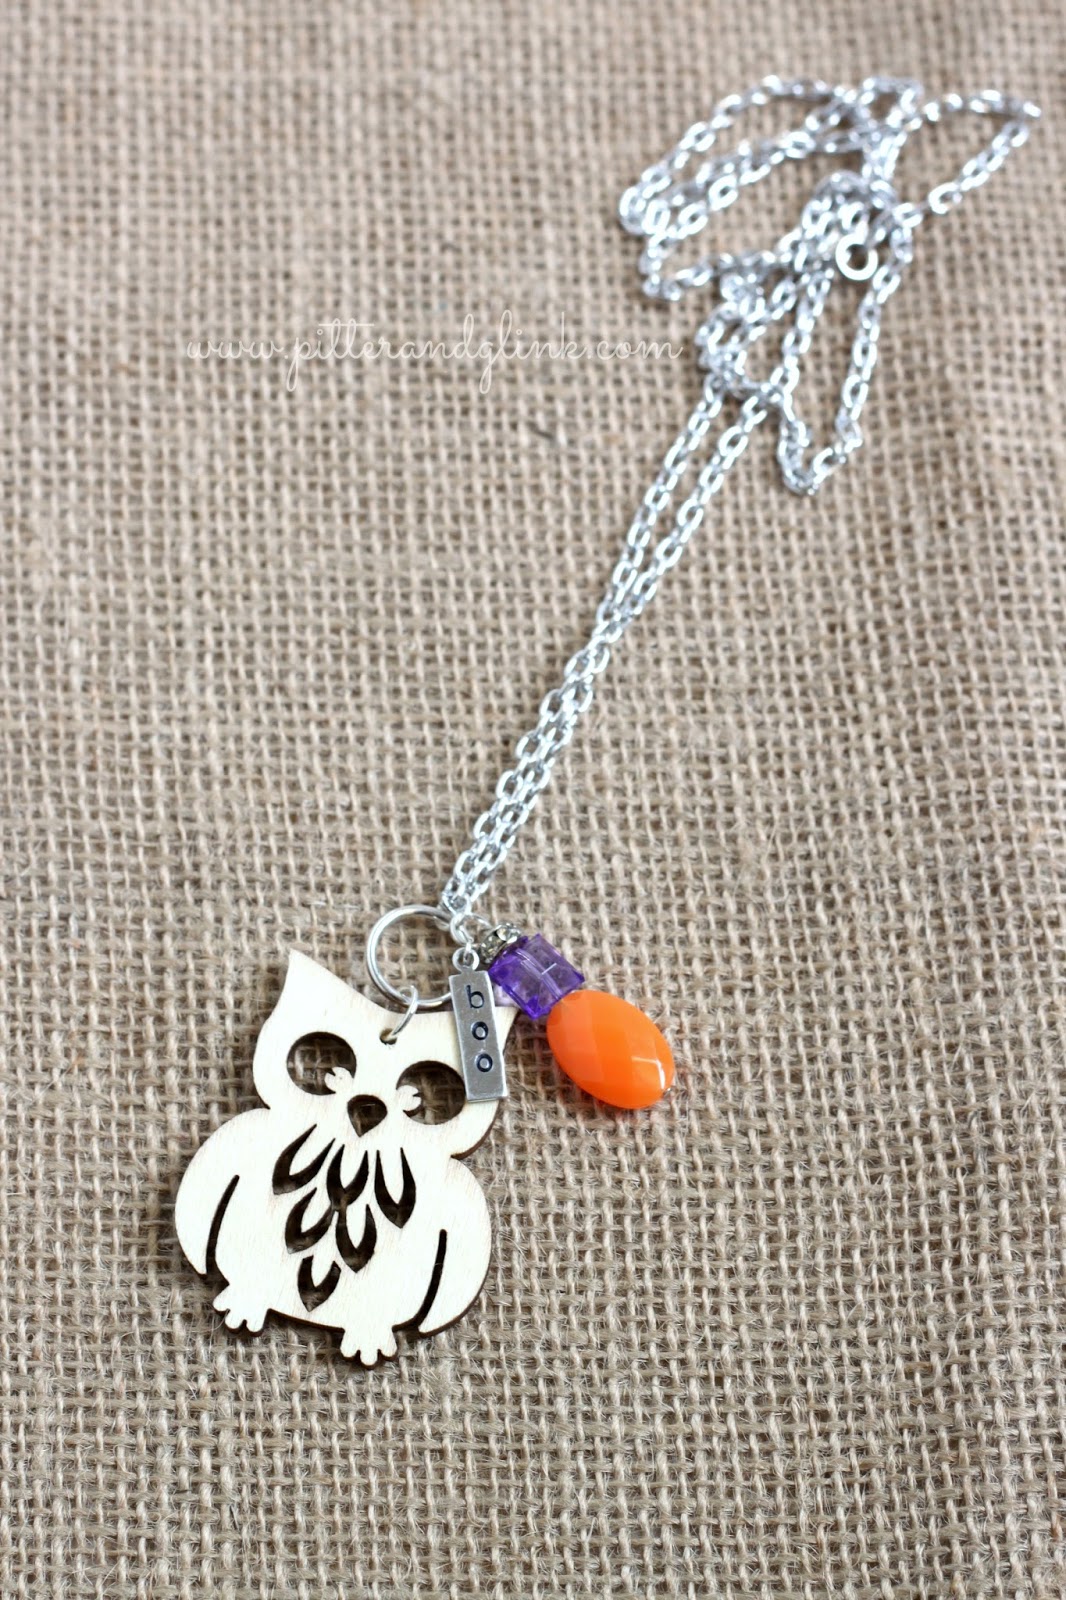 Halloween Owl Necklace with Stamped Metal "Boo" Charm pitterandglink.com